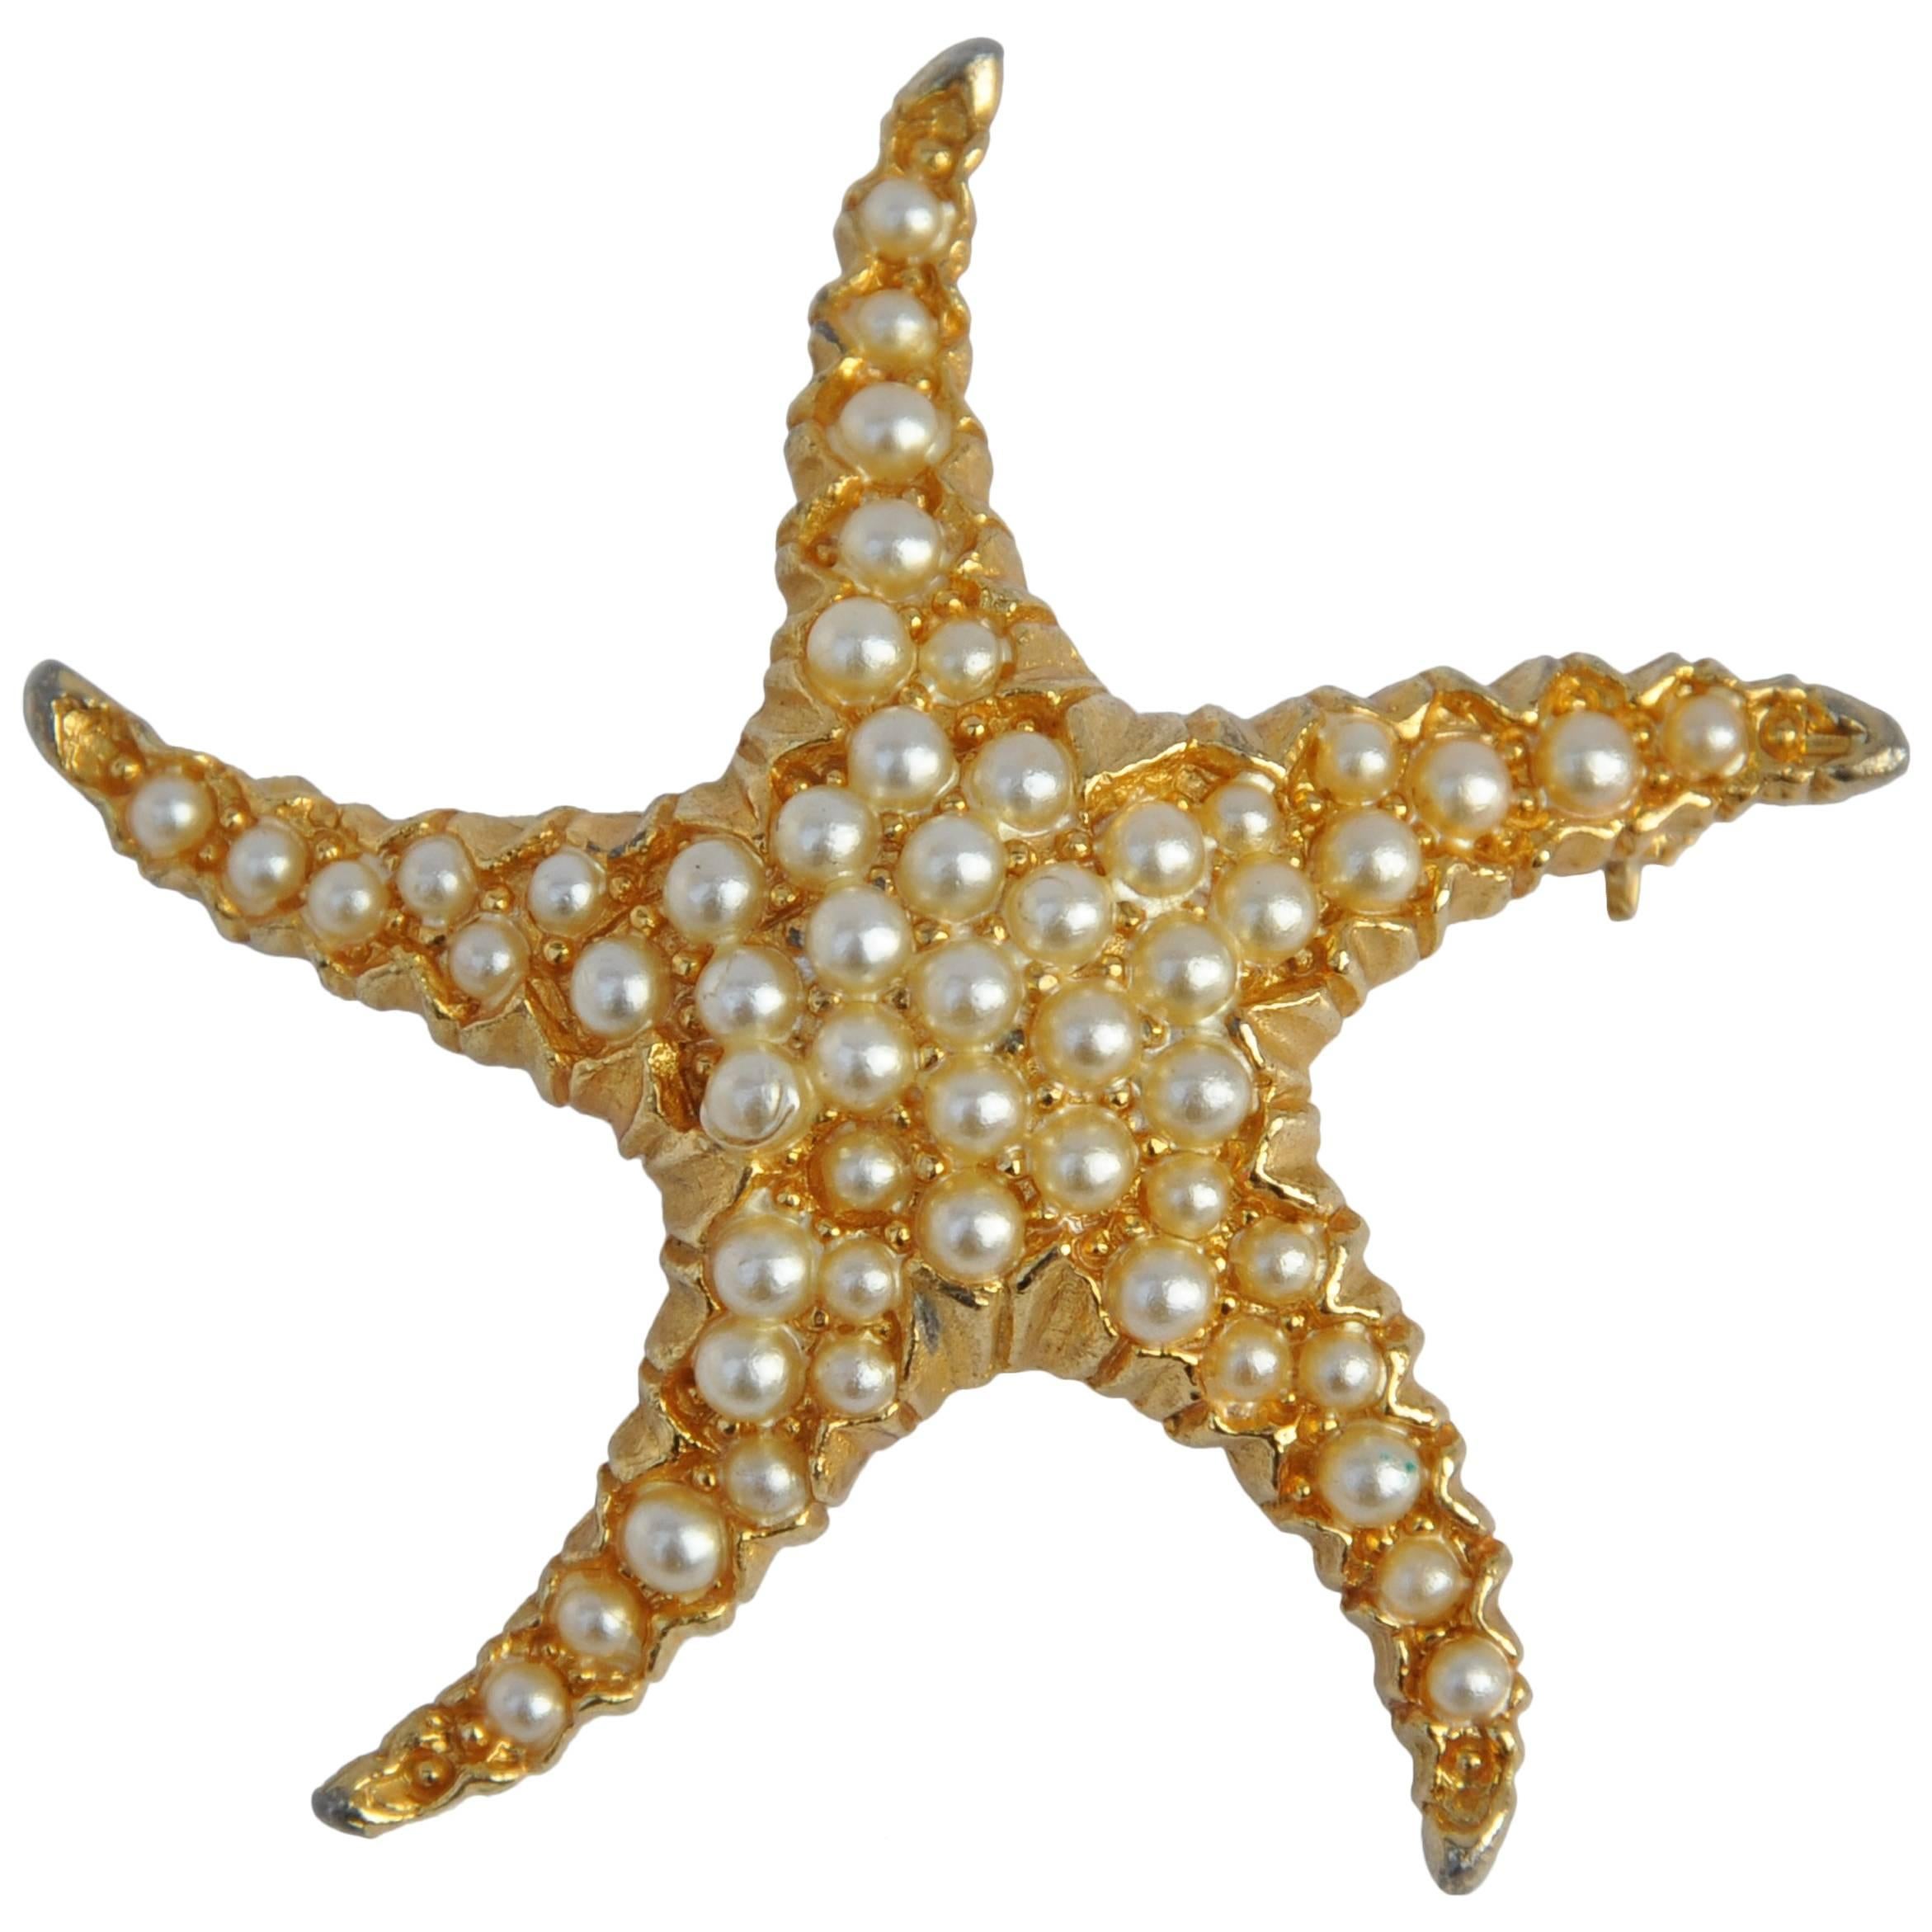 Large Gilded Gold Vermeil "Starfish" with Micro Seed Pearls Brooch